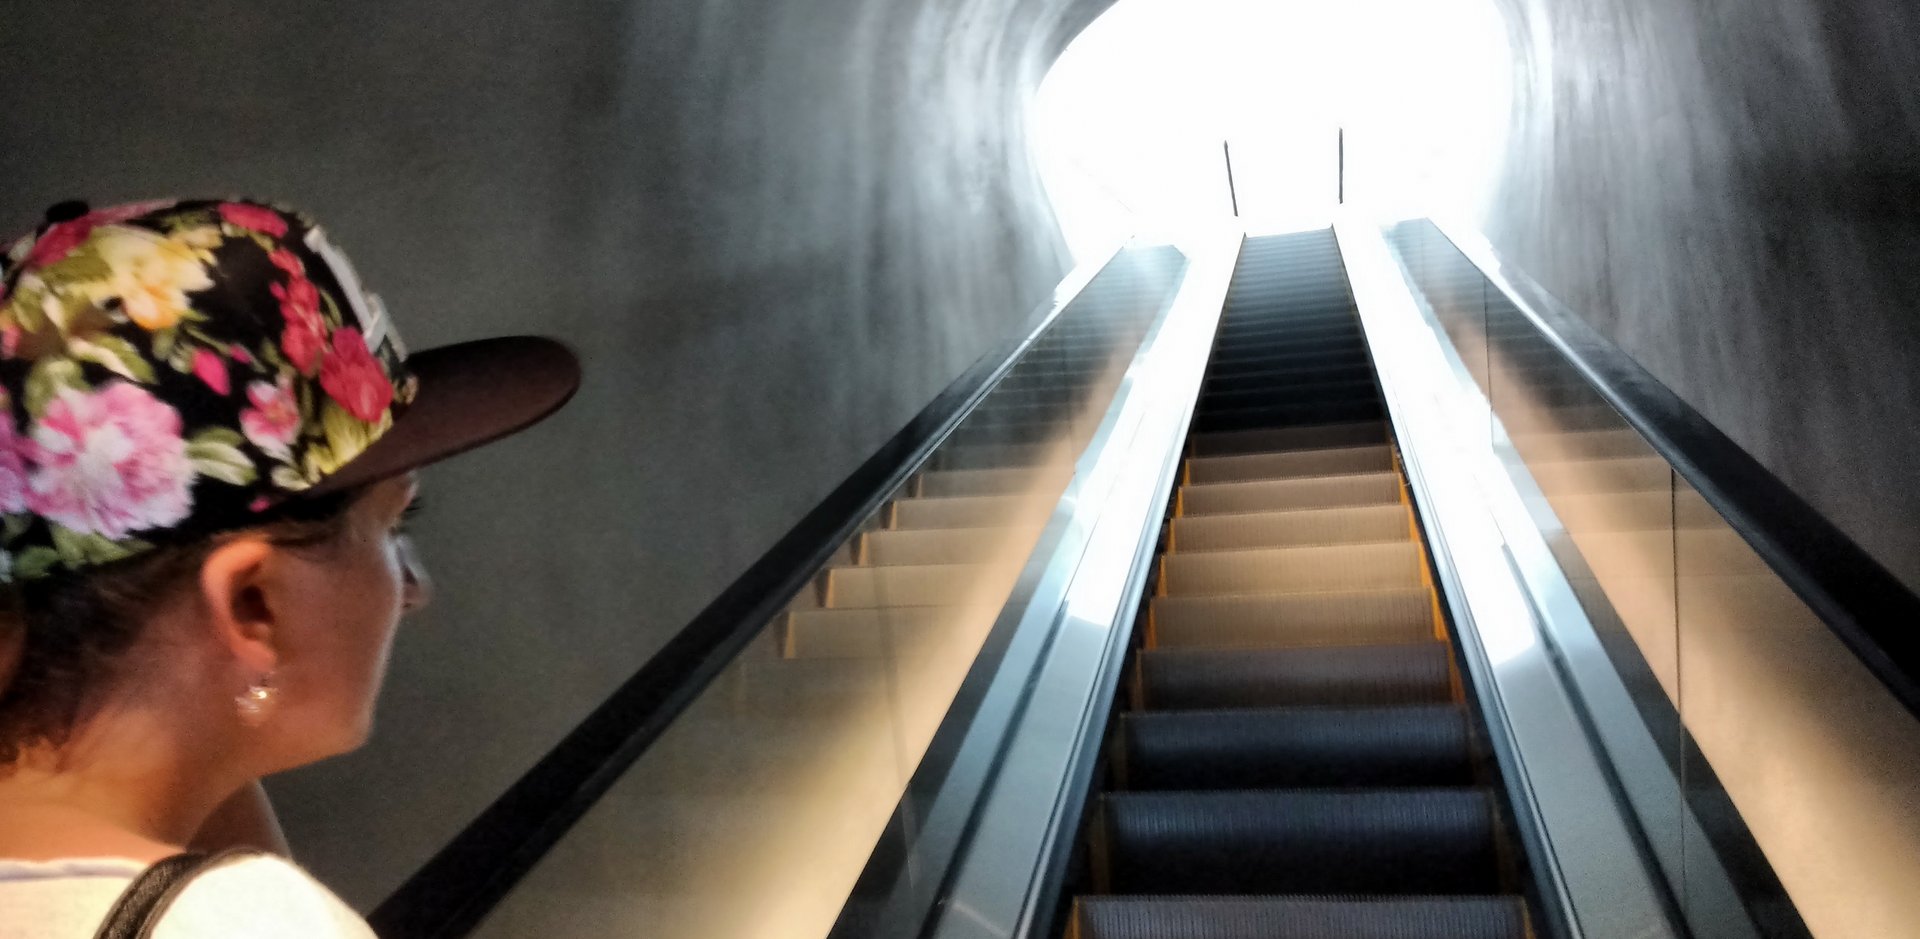 Going up the escalator at the brand new Broad Museum on Grand Avenue in Los Angeles